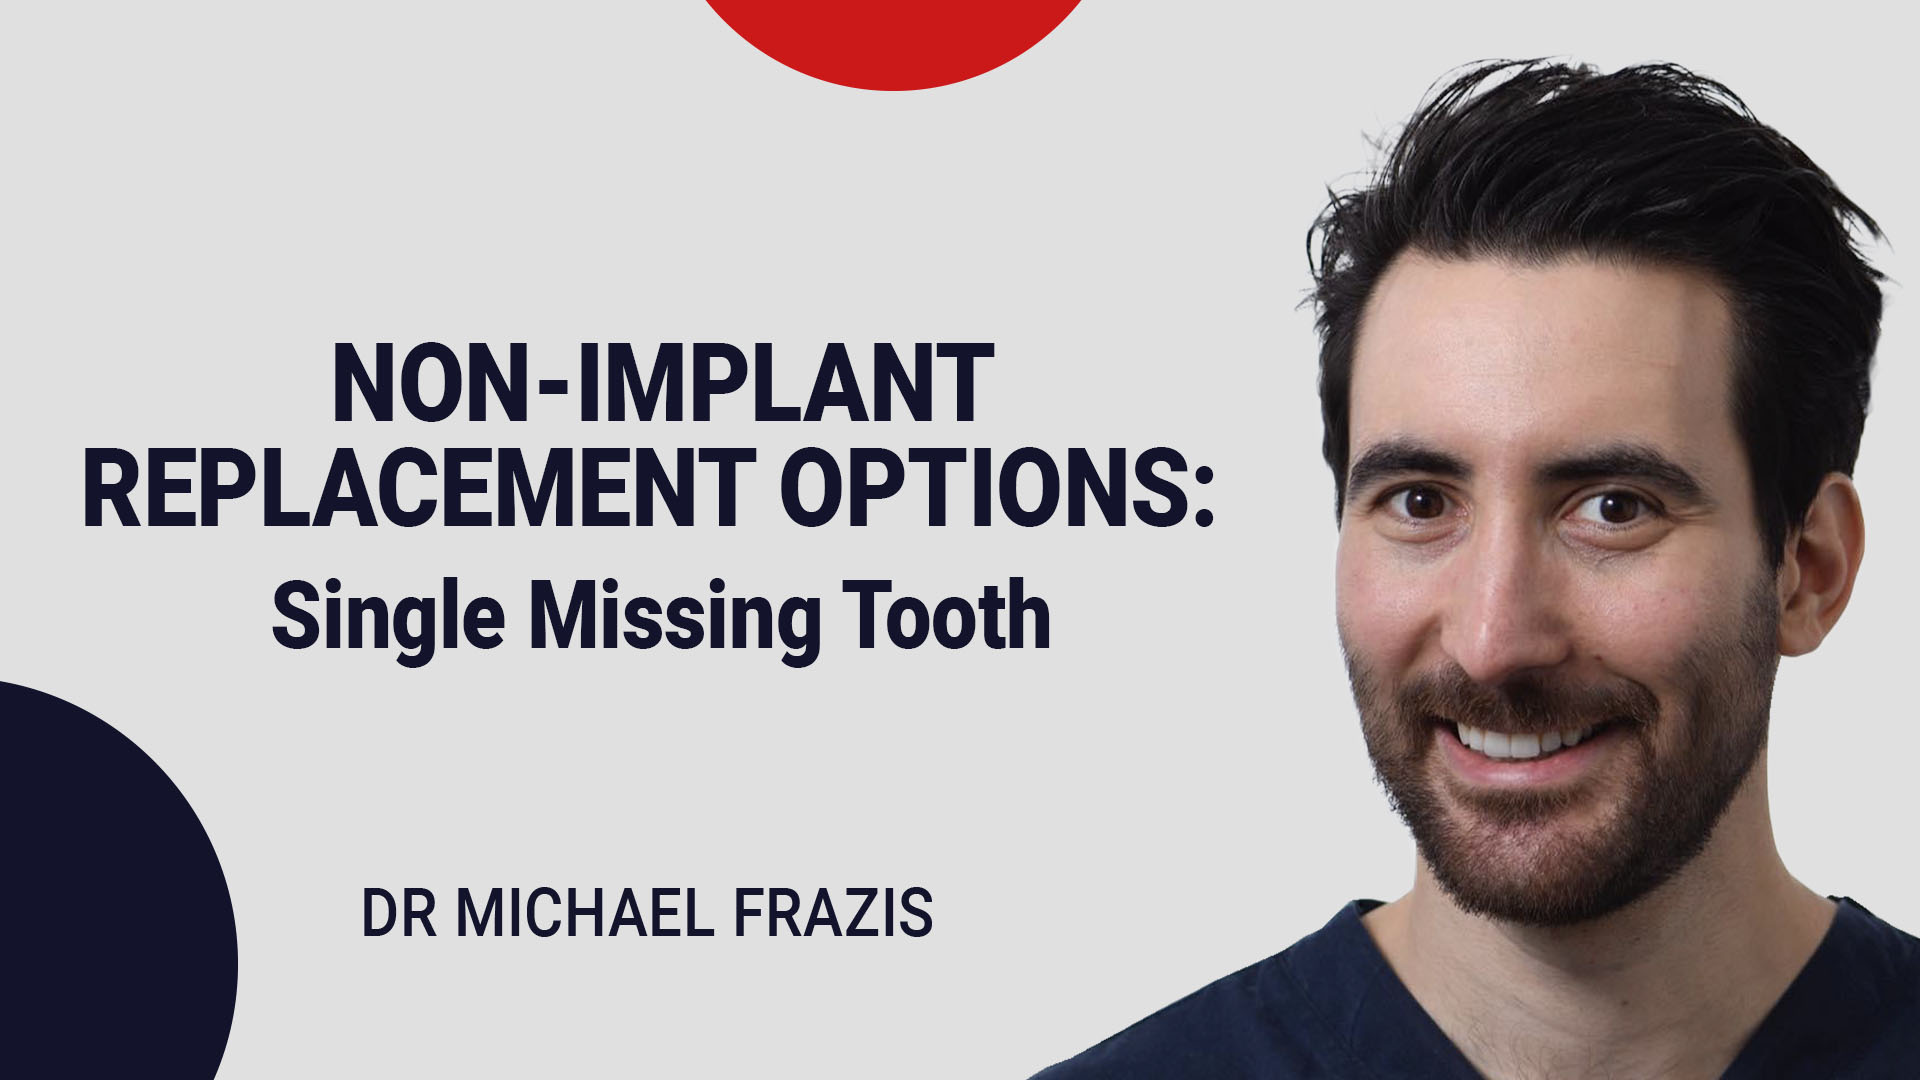 Non-Implant Replacement Options - Single Missing Tooth